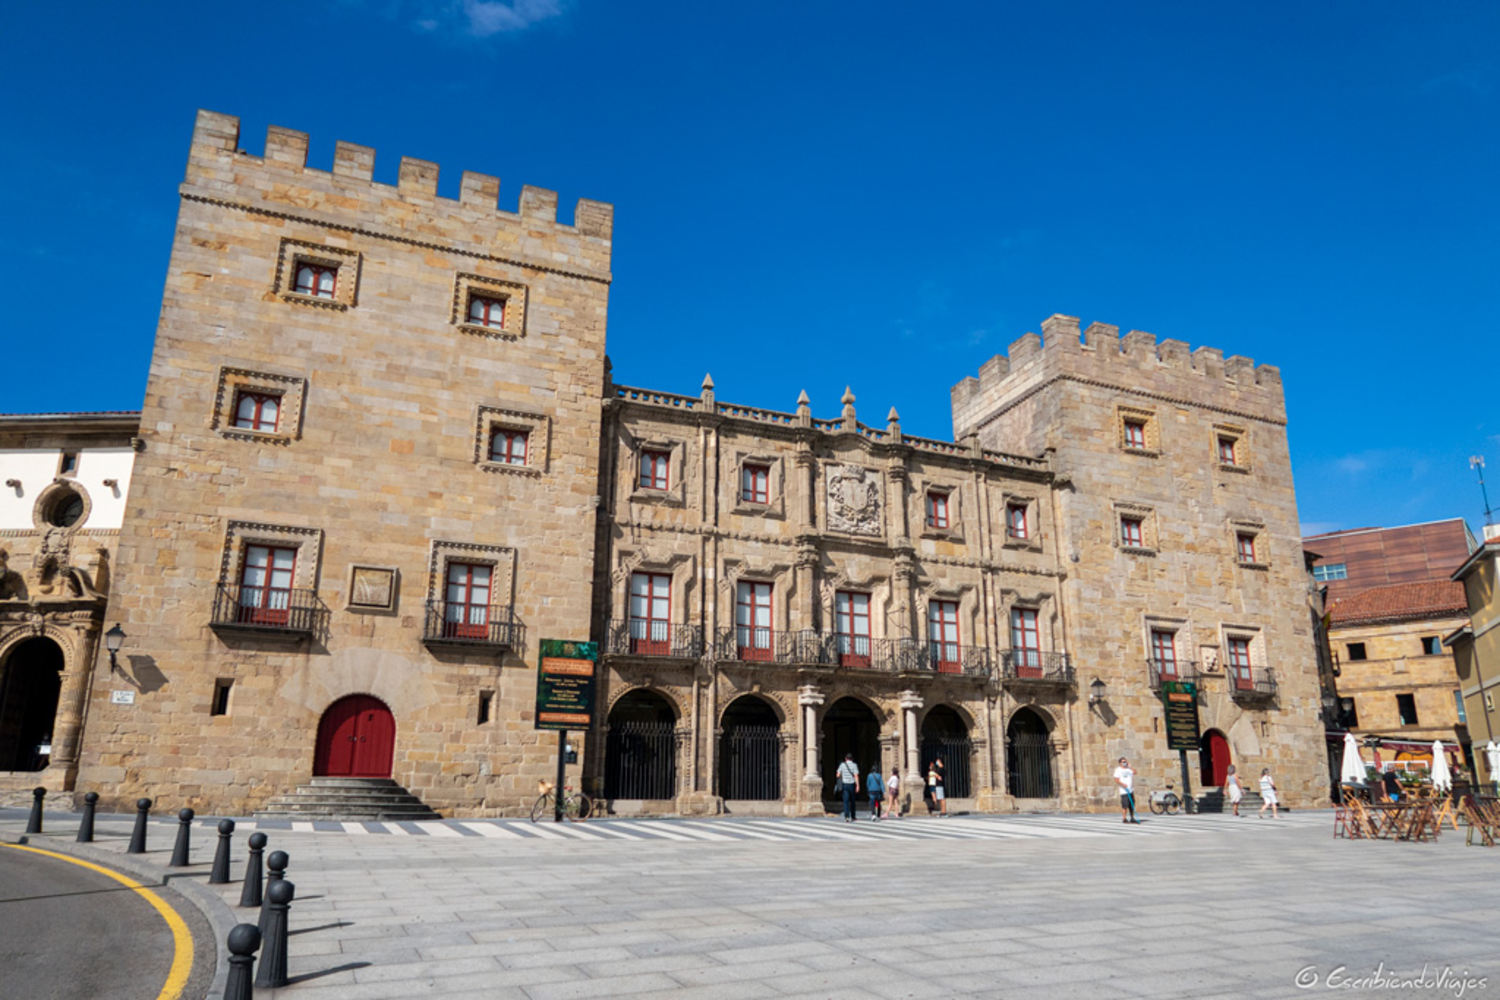 Free tour of the historic center of Gijón